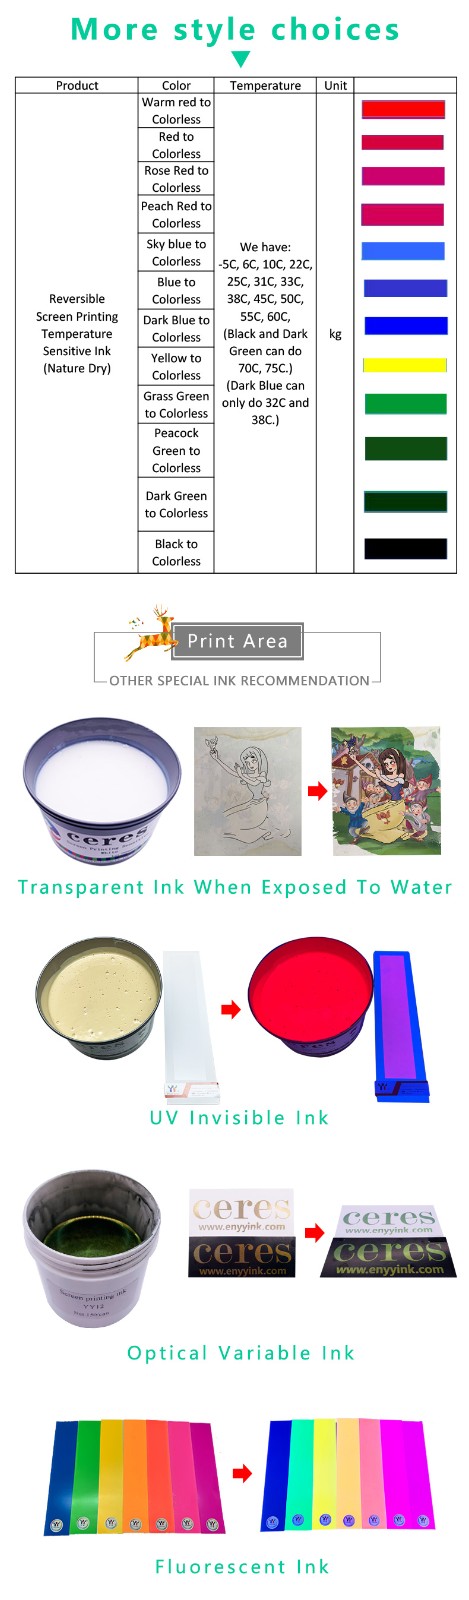 thermochromic Ink